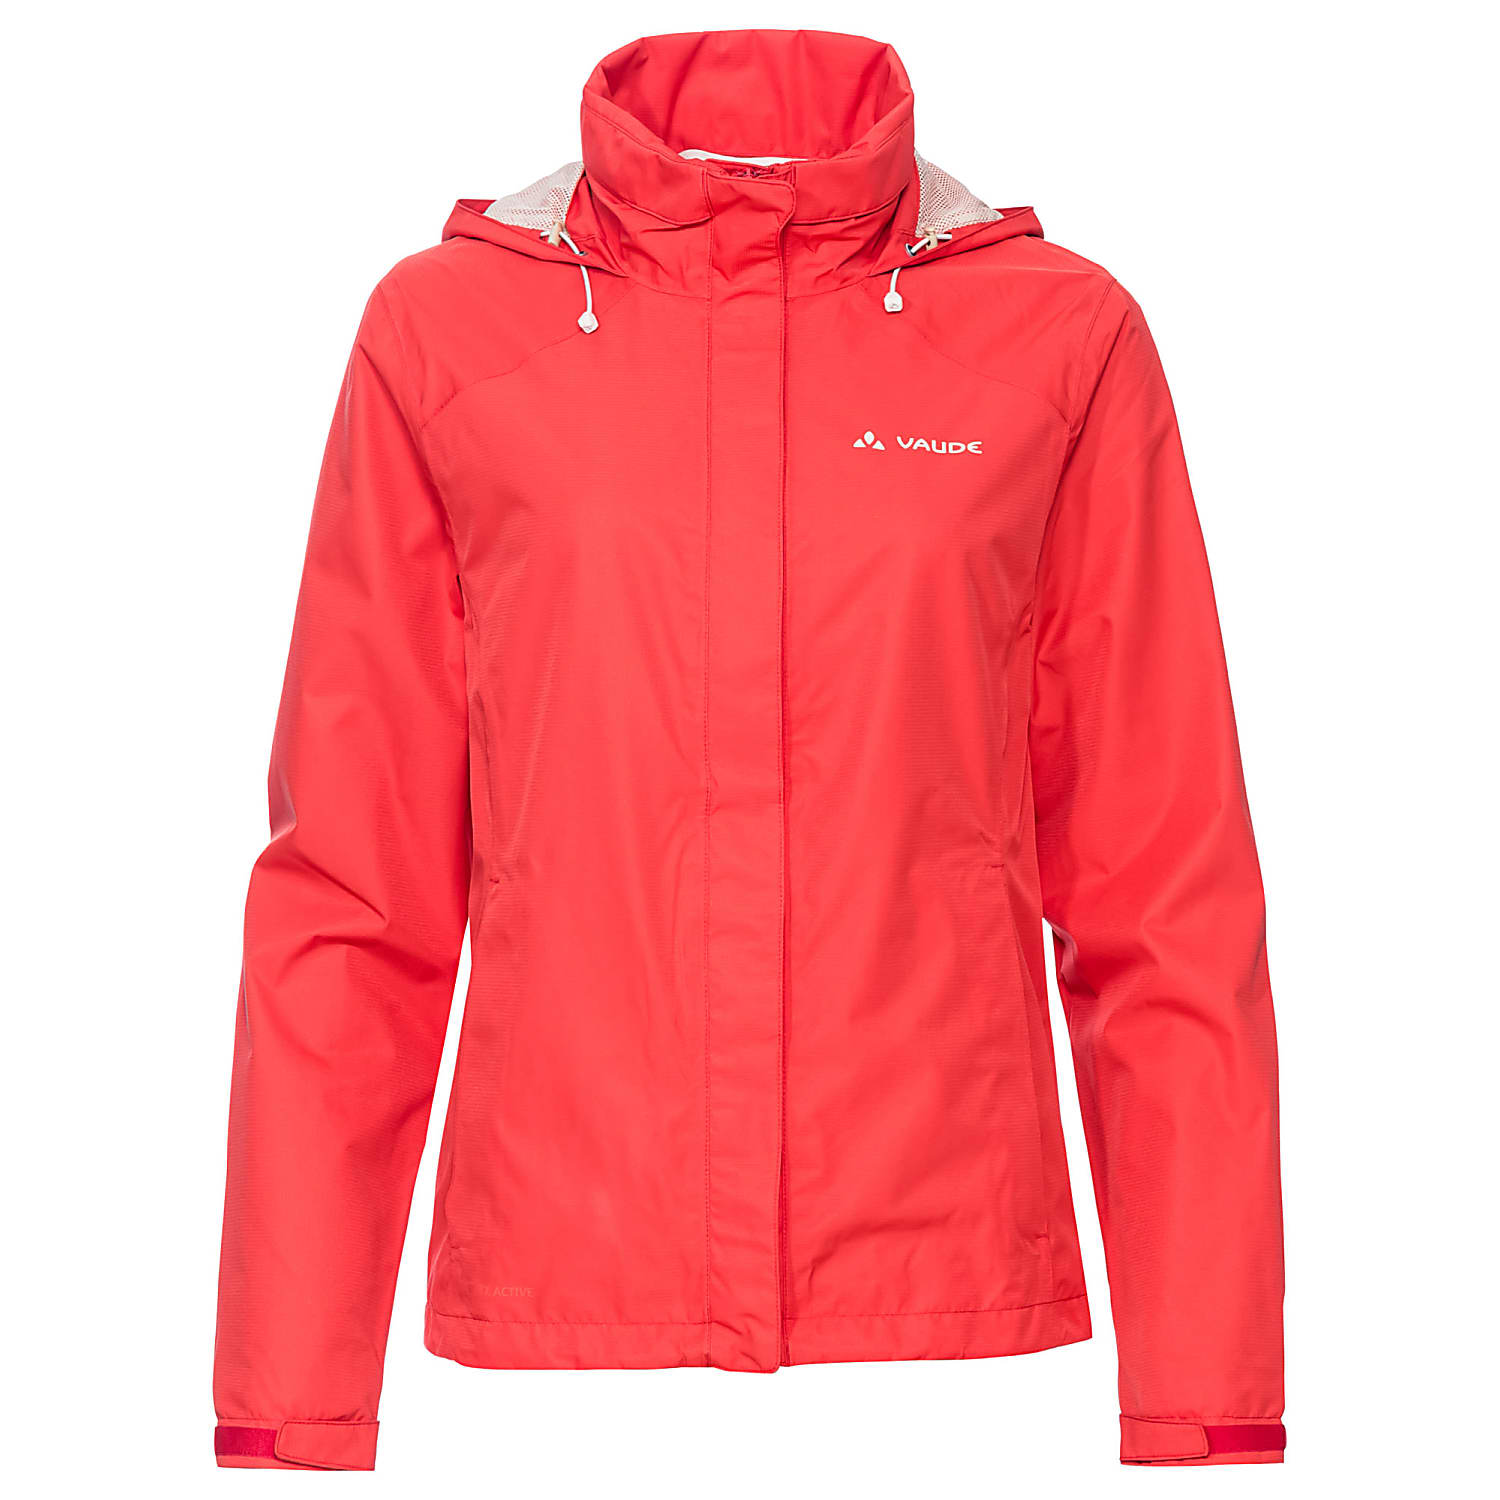 Vaude WOMENS ESCAPE BIKE LIGHT cheap Flame - Fast shipping JACKET, and